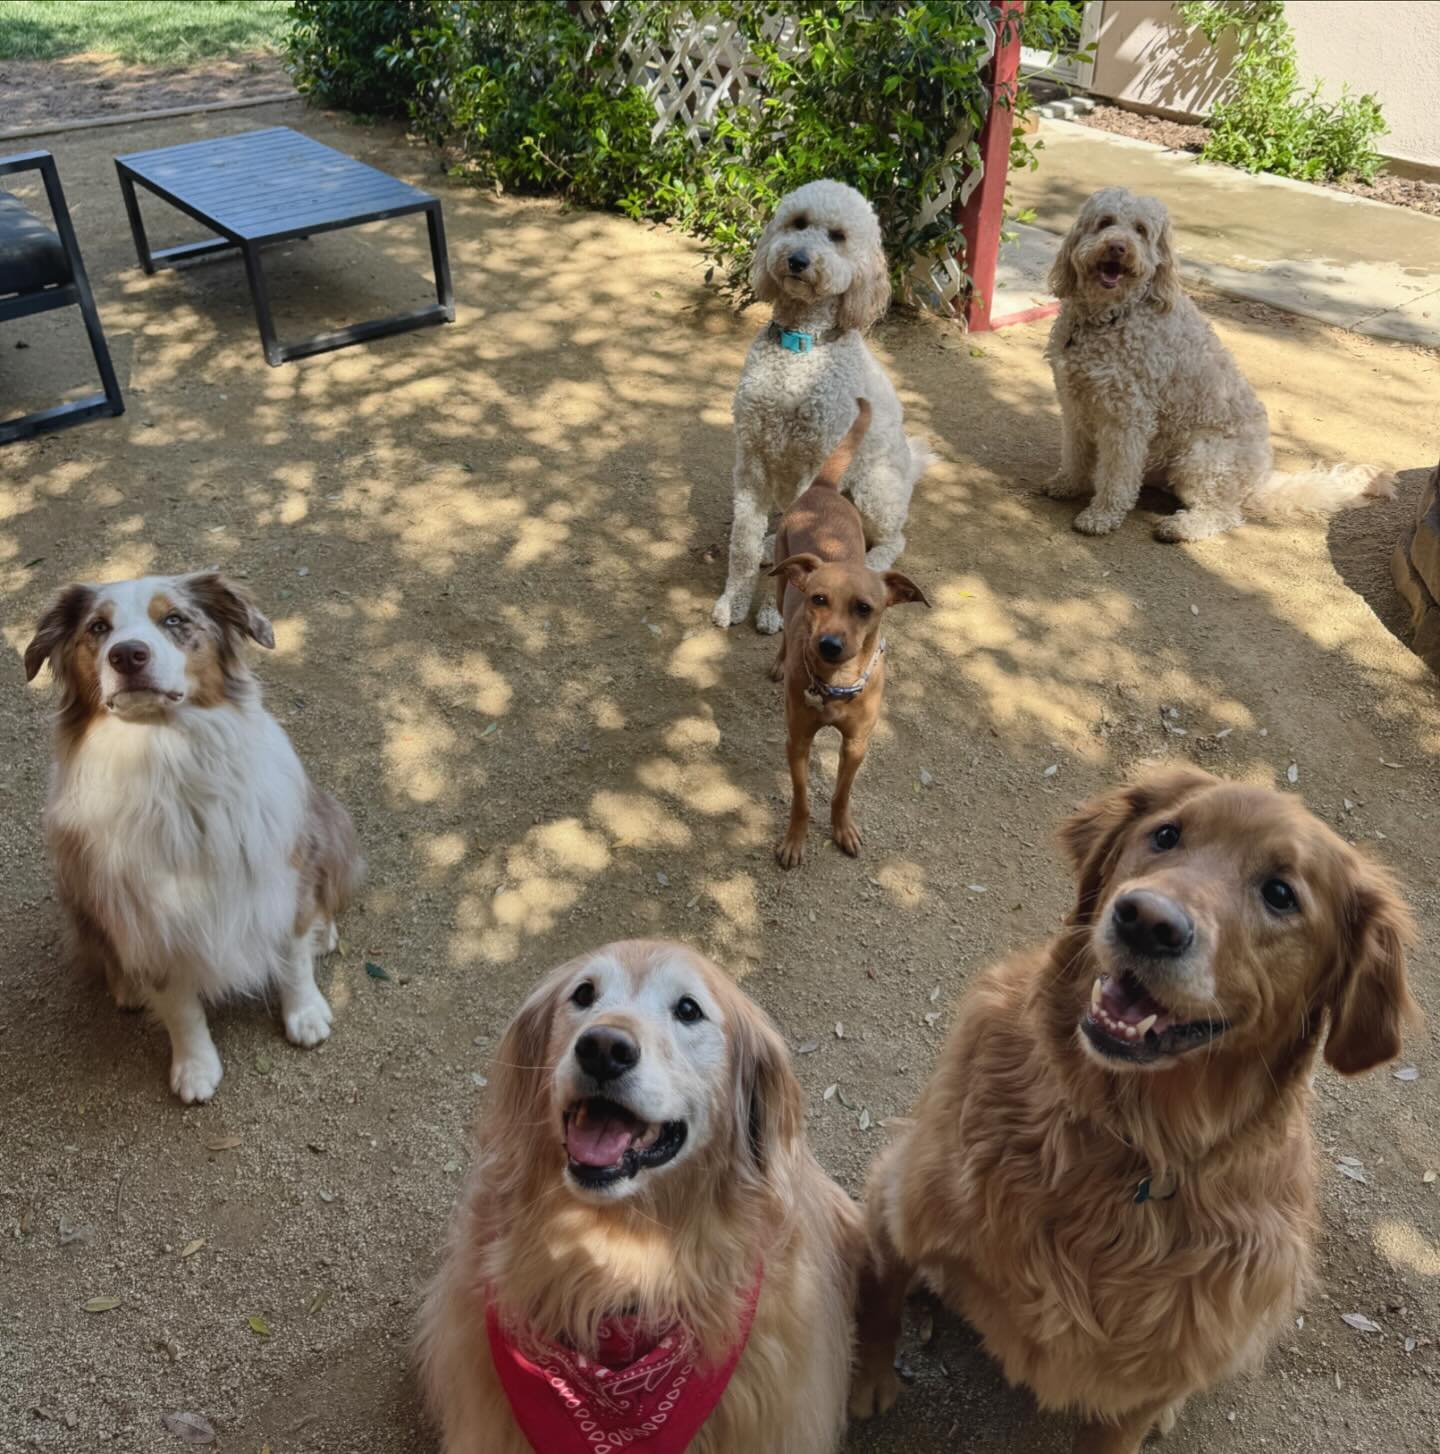 Treat time! It&rsquo;s the only way to get them all to look and focus on me 😉 what a great pack we have today at Davis Happy Paws 🐾 thanks for making my job so easy